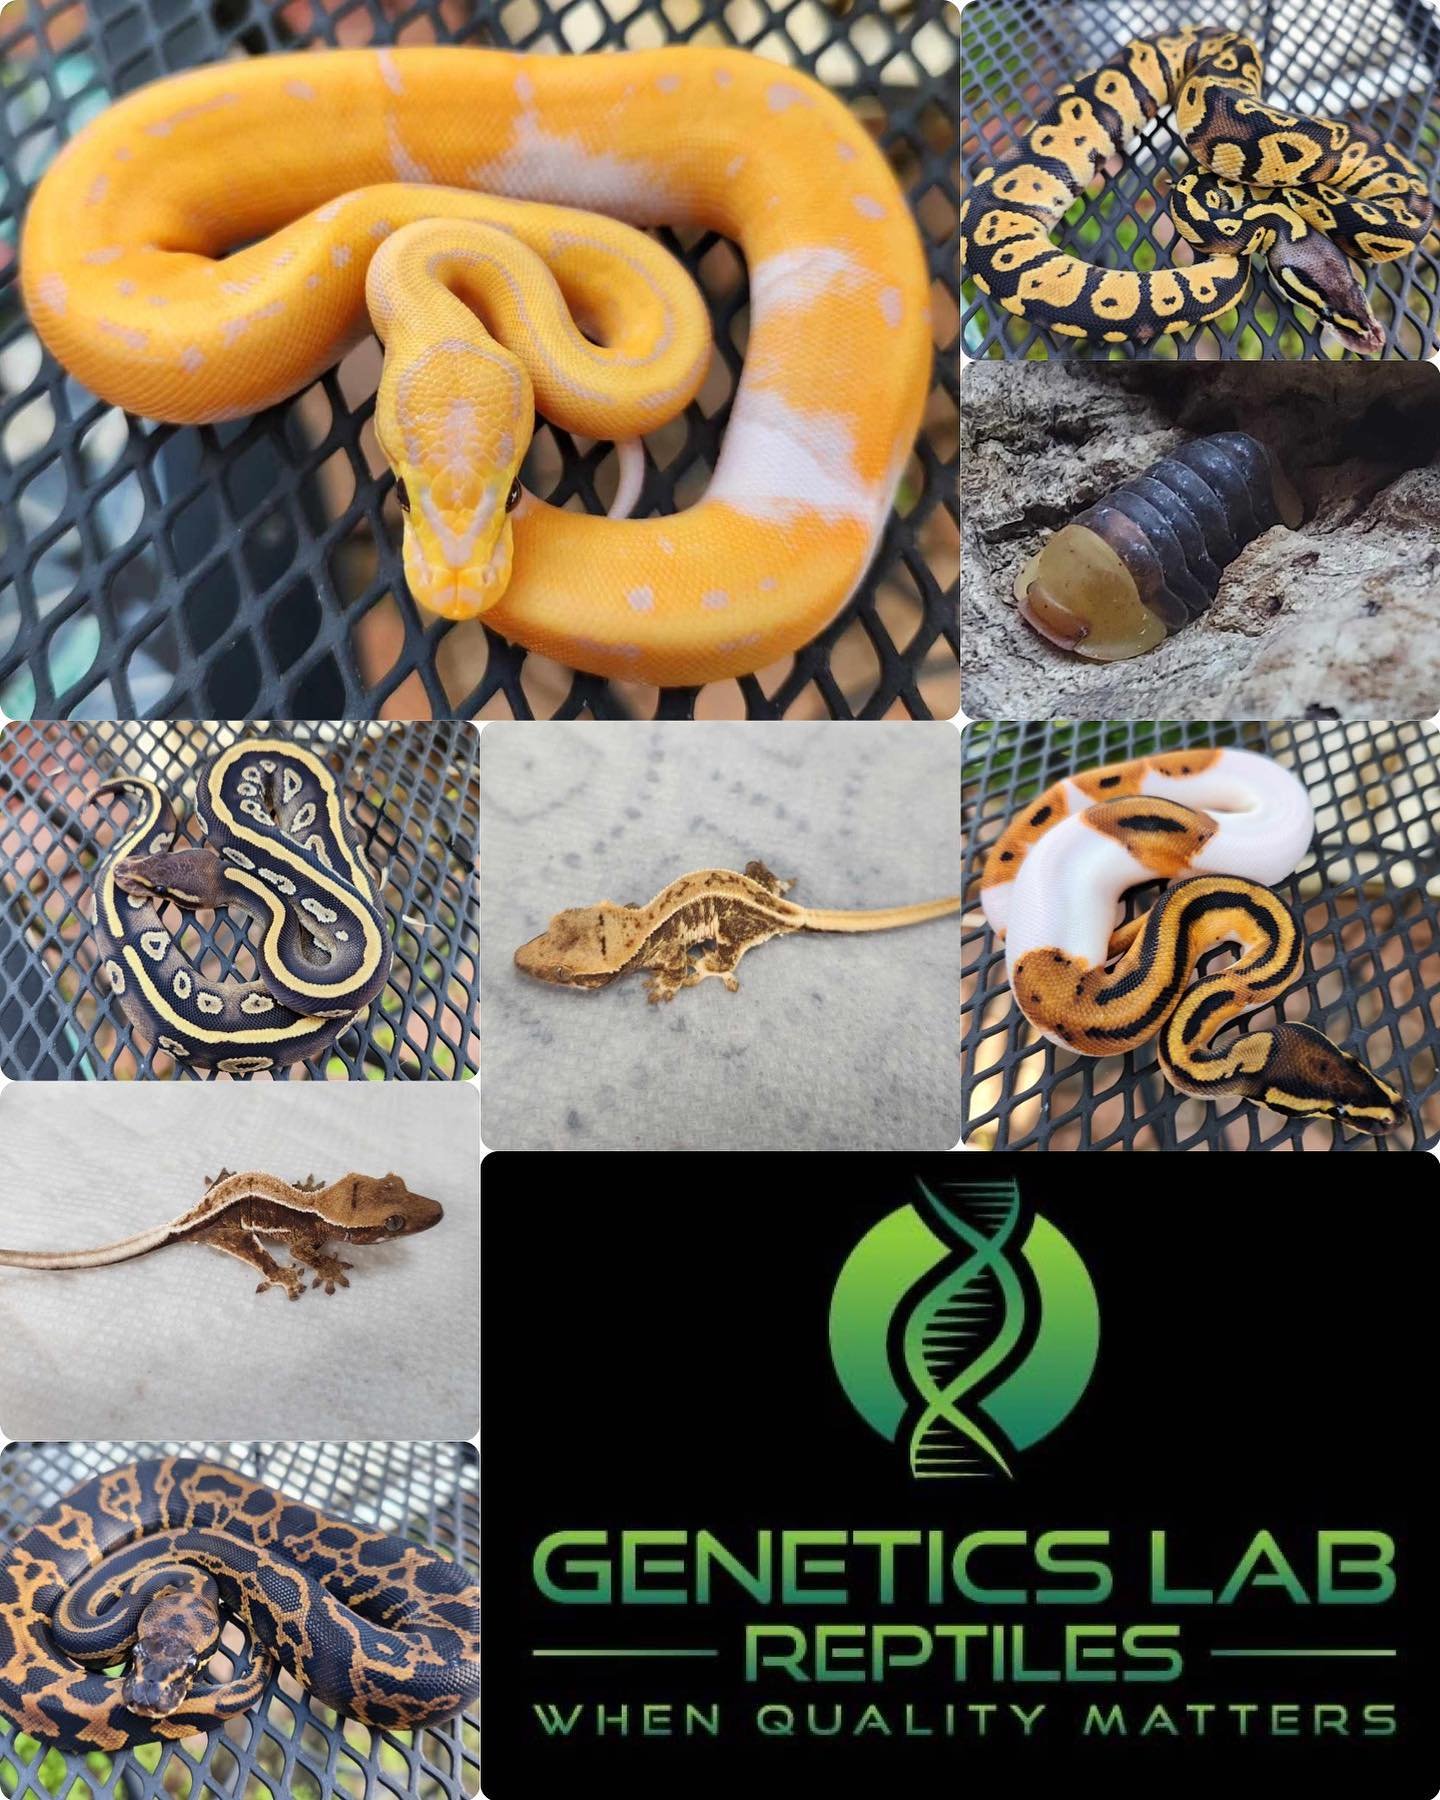 @genetics_lab_reptiles will be vending with us on June 2nd!

They will be bringing a variety of crested geckos along with selectively bred ball pythons. They will also have a few species of isopods available!

Make sure to go check them out! #snakes 